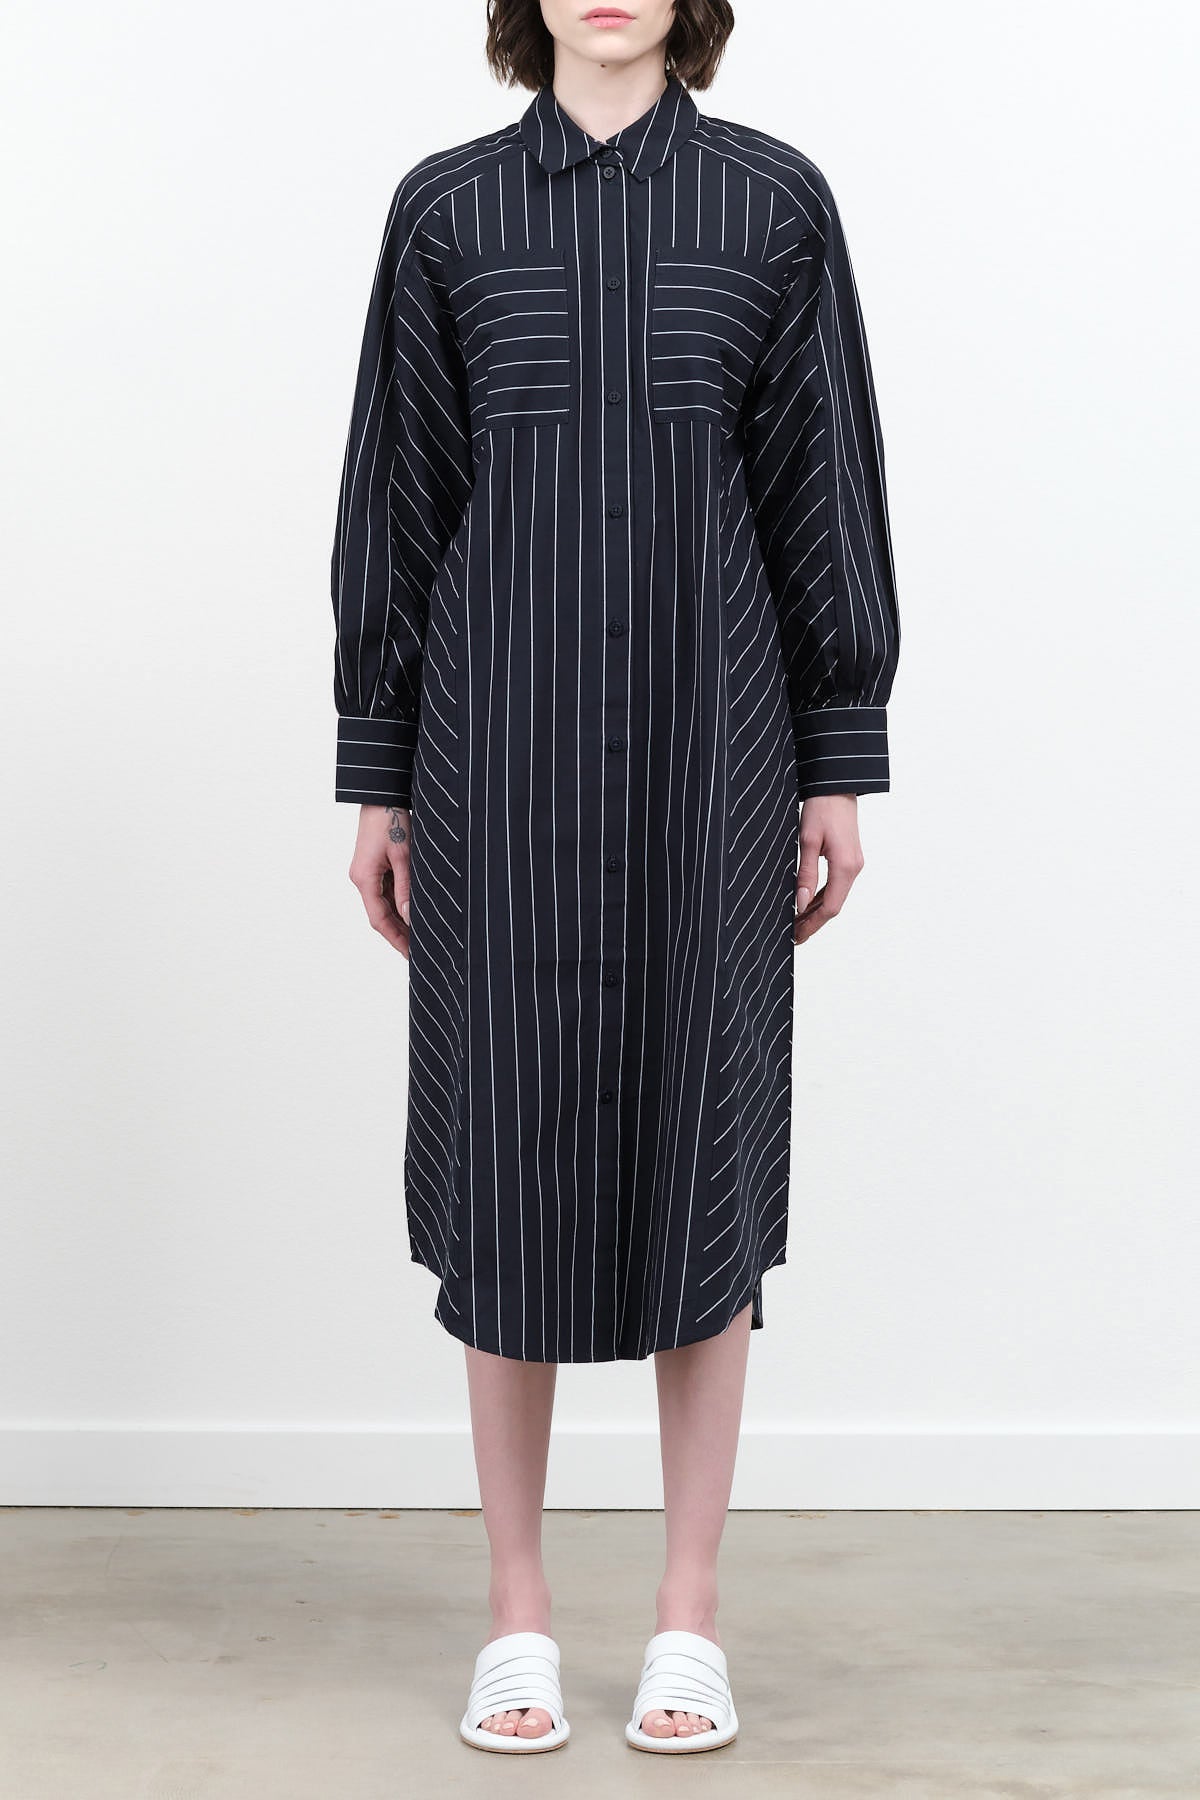 Yves Navy Pinstripe Long Shirt Dress by Kowtow with Curved Hem and Collar